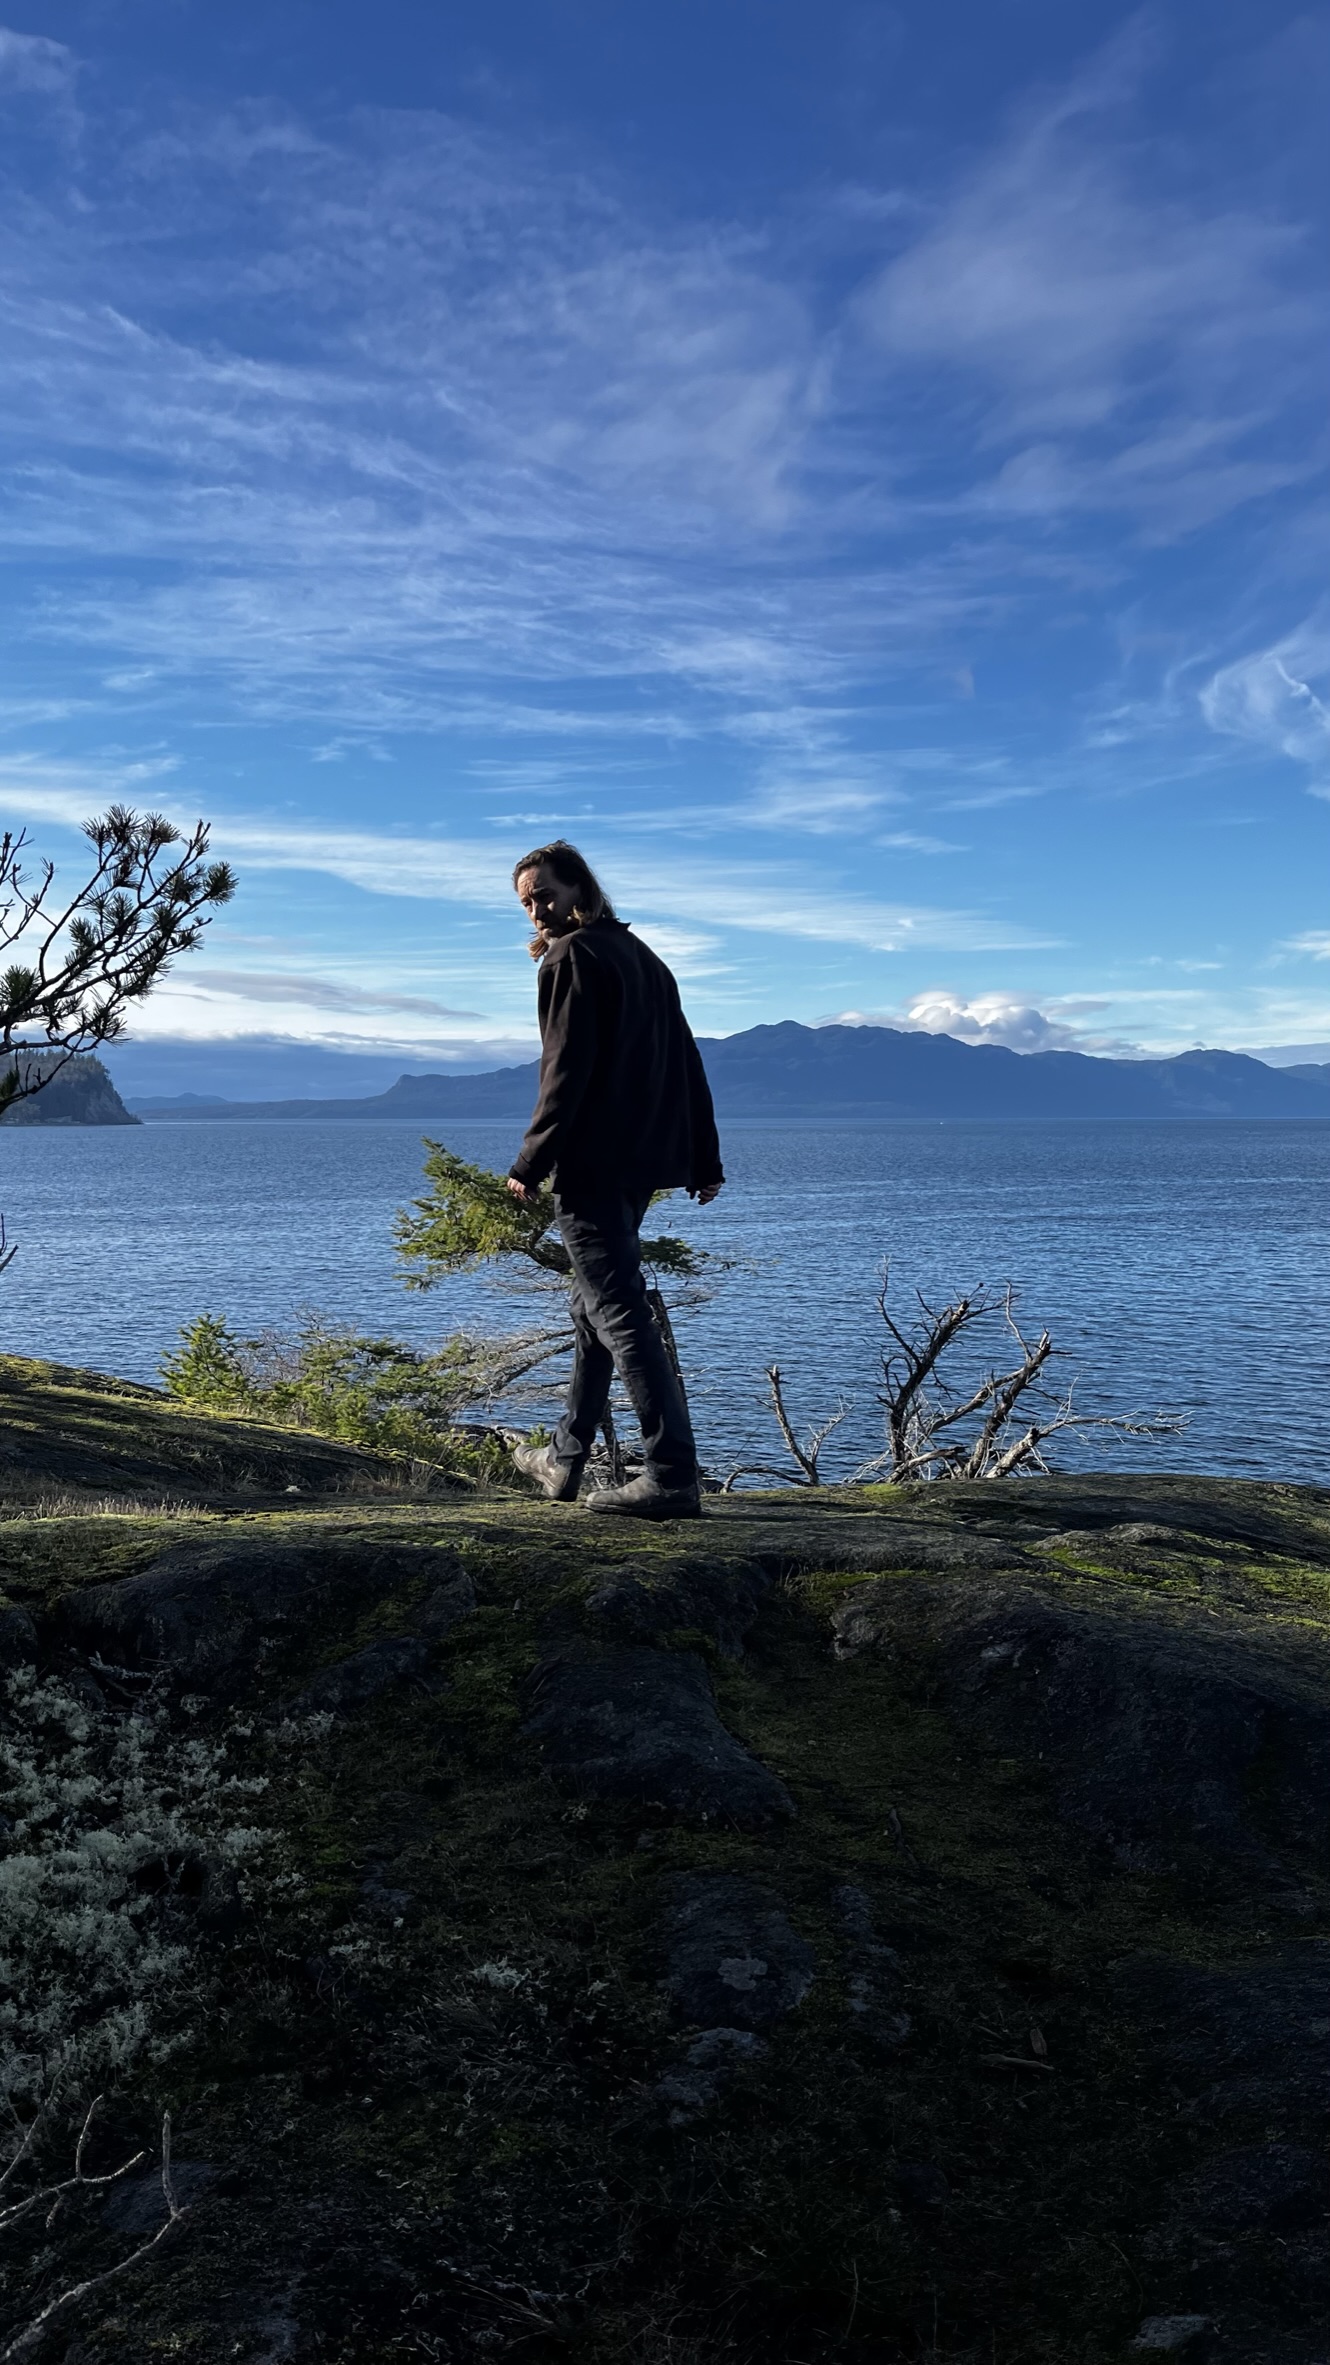 Sam at Smuggler Cove with the distant Salish Sea